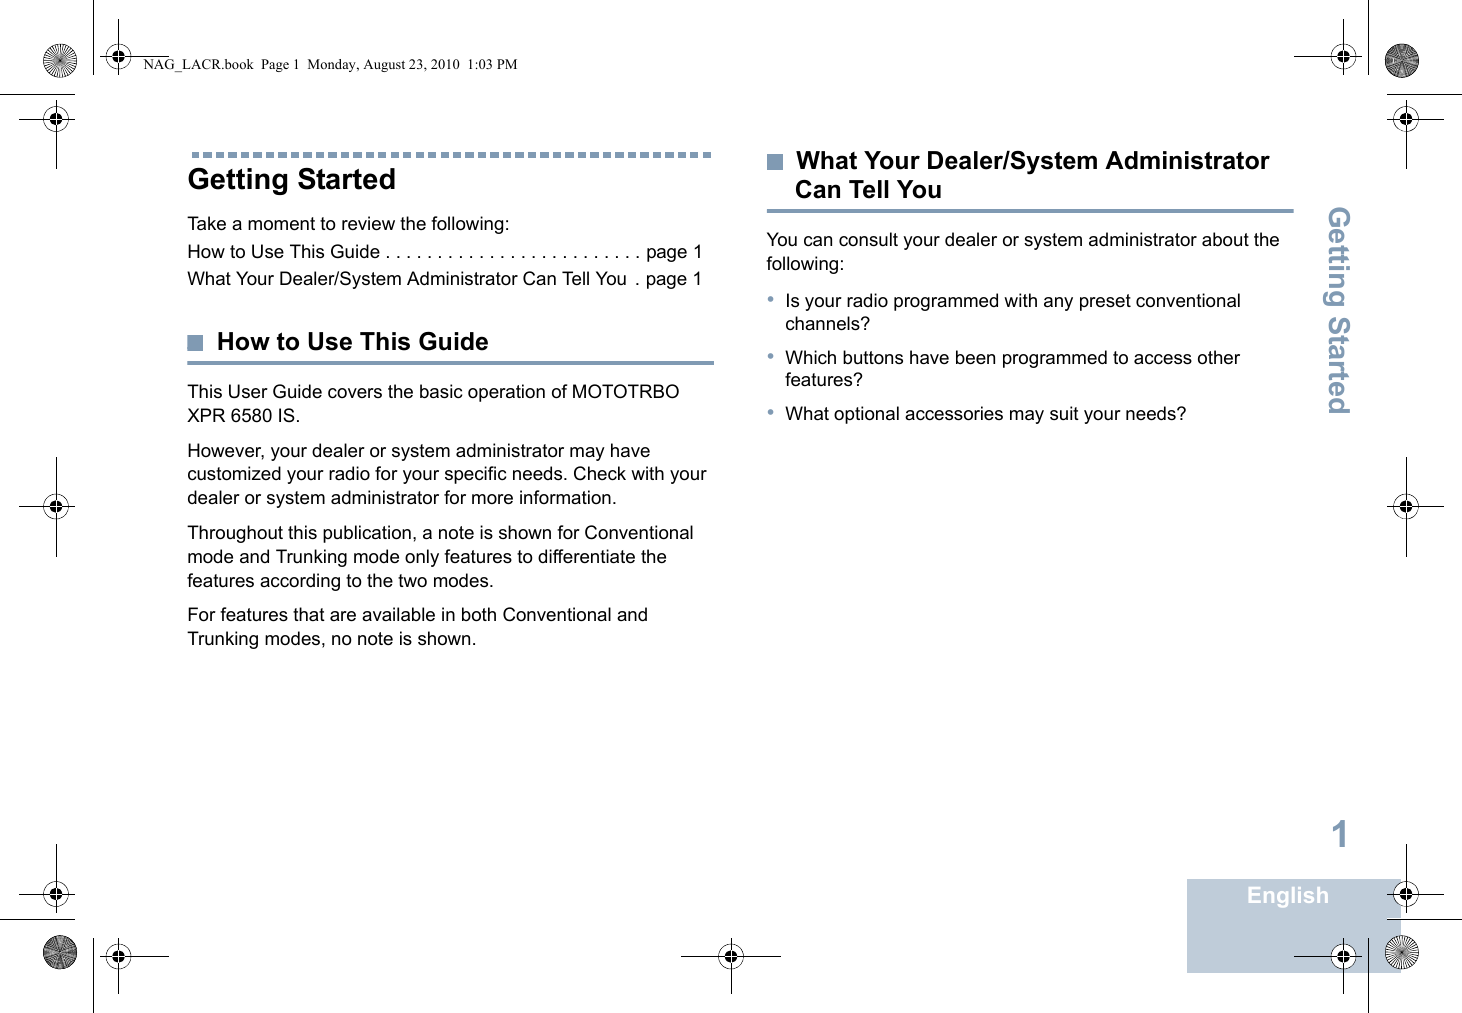 Getting StartedEnglish1Getting StartedTake a moment to review the following:How to Use This Guide . . . . . . . . . . . . . . . . . . . . . . . . . page 1What Your Dealer/System Administrator Can Tell You  . page 1How to Use This GuideThis User Guide covers the basic operation of MOTOTRBO XPR 6580 IS.However, your dealer or system administrator may have customized your radio for your specific needs. Check with your dealer or system administrator for more information.Throughout this publication, a note is shown for Conventional mode and Trunking mode only features to differentiate the features according to the two modes.For features that are available in both Conventional and Trunking modes, no note is shown.What Your Dealer/System Administrator Can Tell YouYou can consult your dealer or system administrator about the following:•Is your radio programmed with any preset conventional channels?•Which buttons have been programmed to access other features?•What optional accessories may suit your needs?NAG_LACR.book  Page 1  Monday, August 23, 2010  1:03 PM